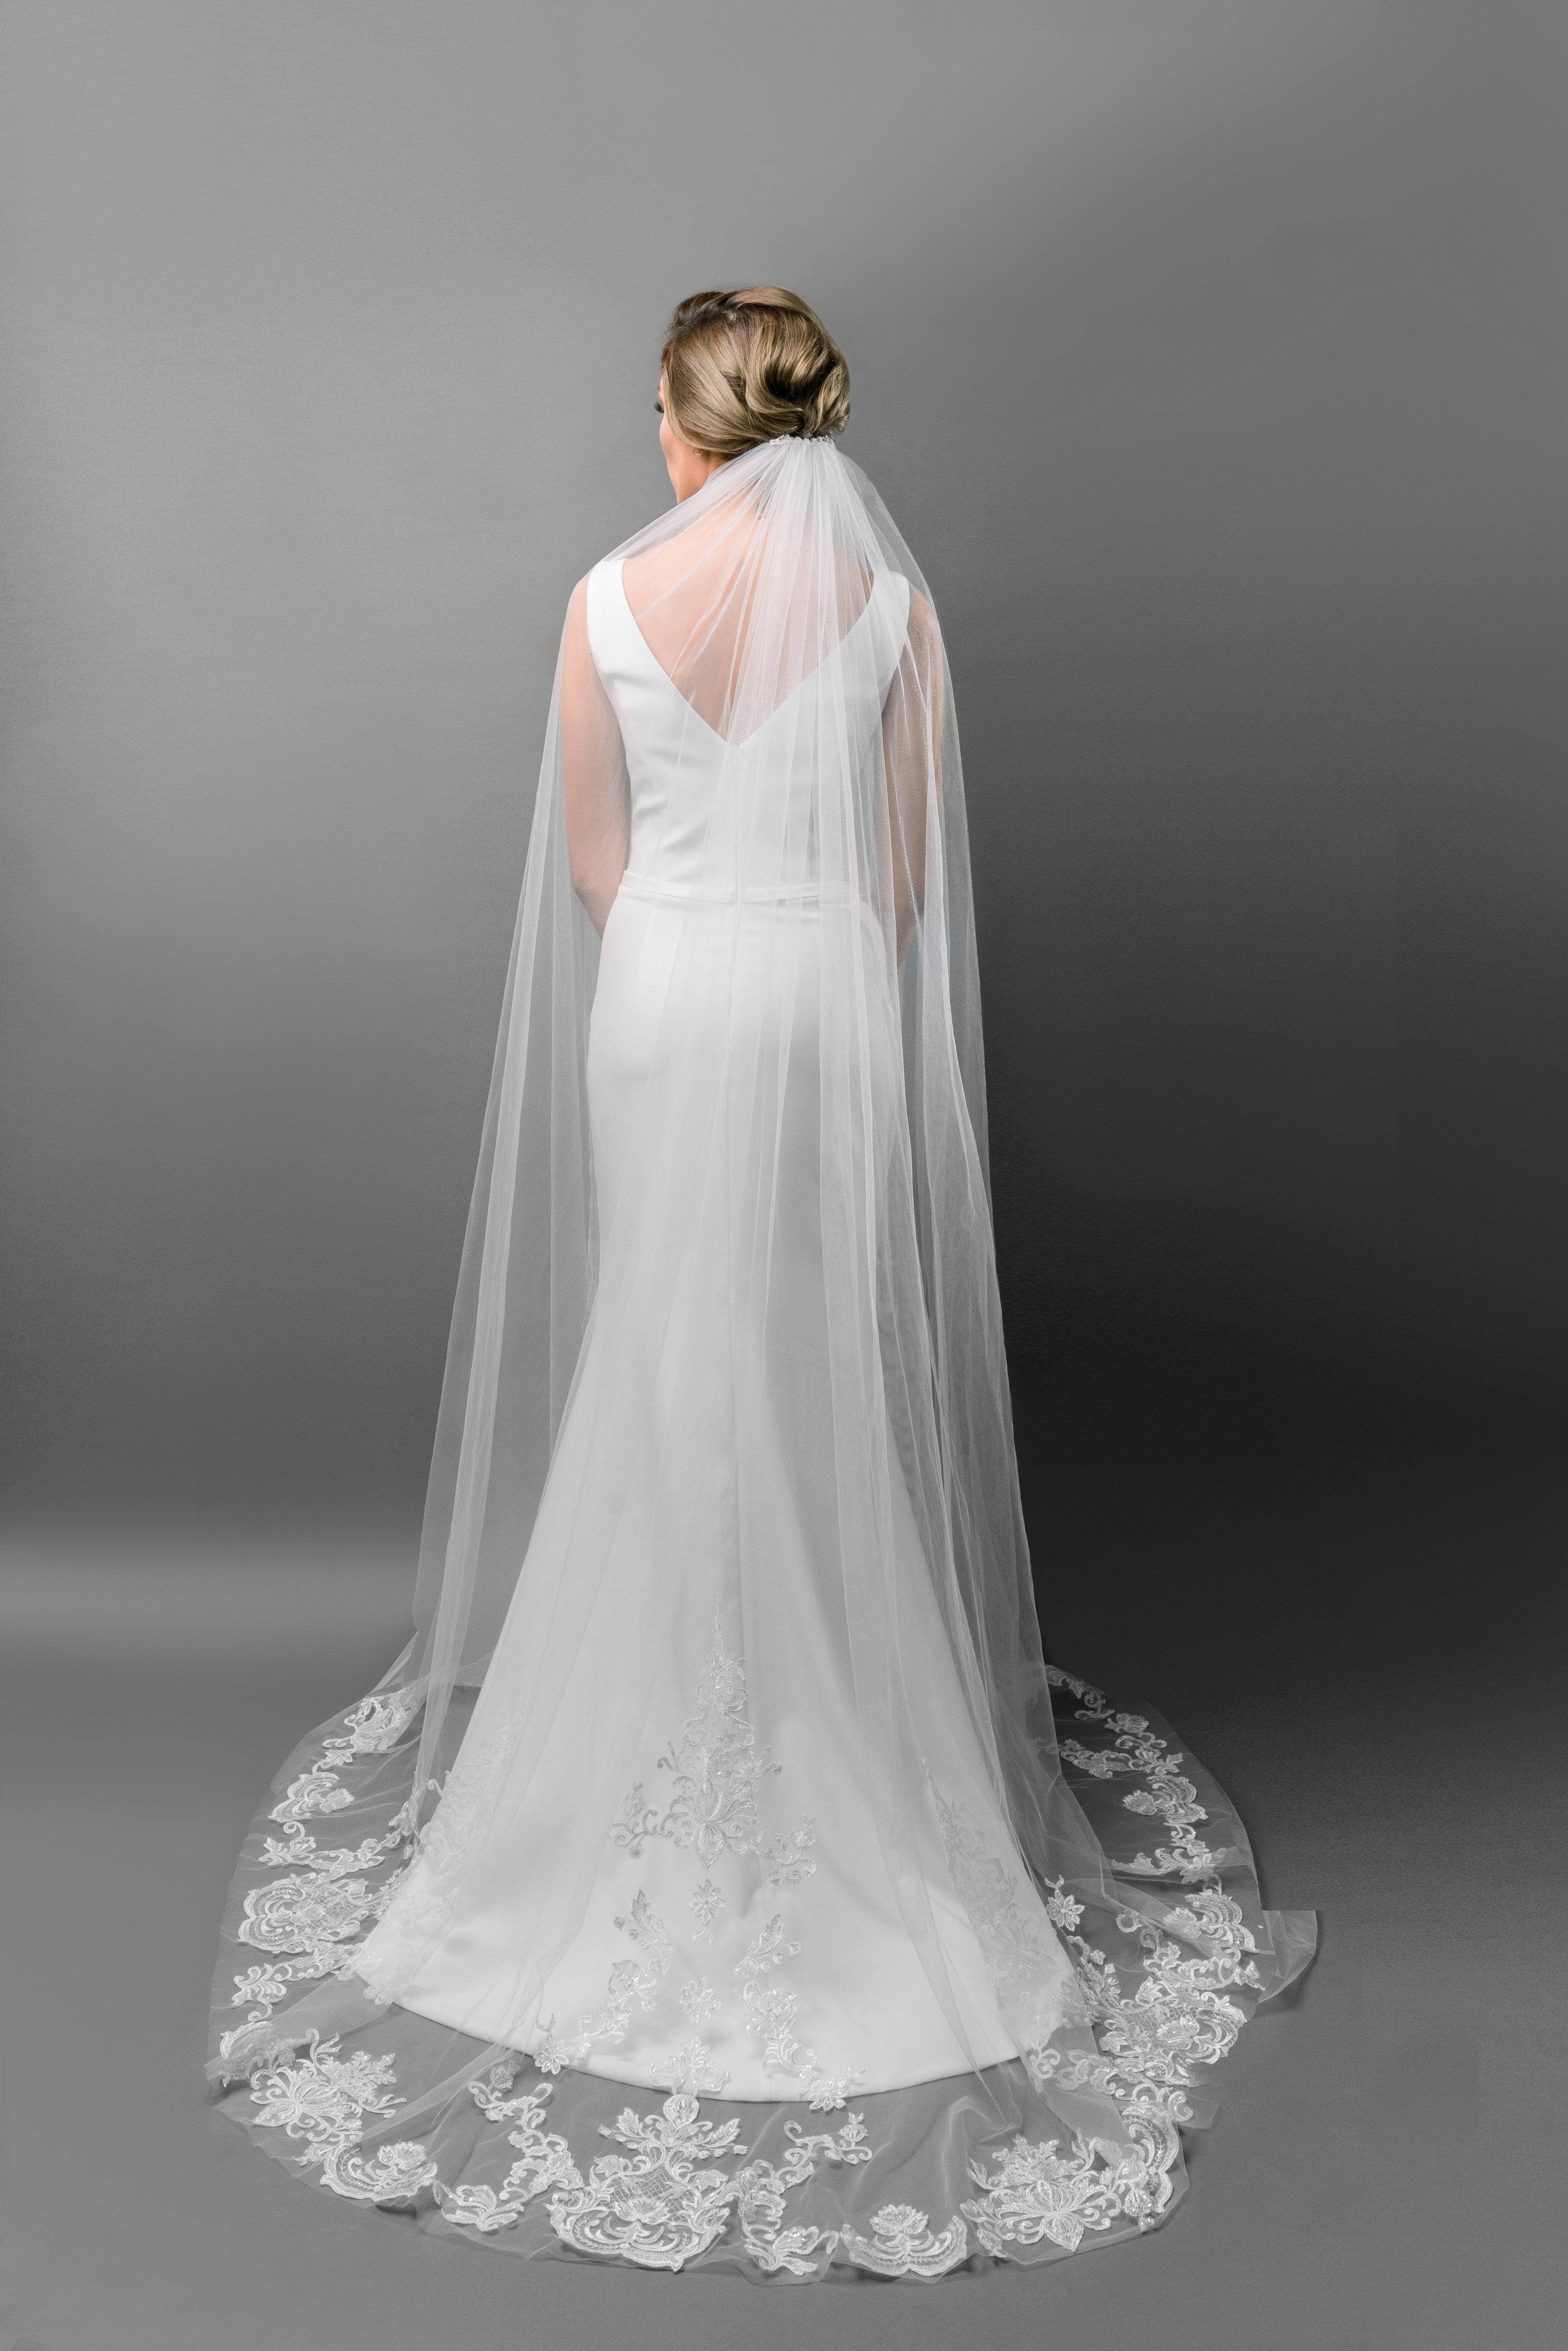 Cathedral Length Bridal Veil with Lace Applique and Sparkly Sequins - Maxima Bridal